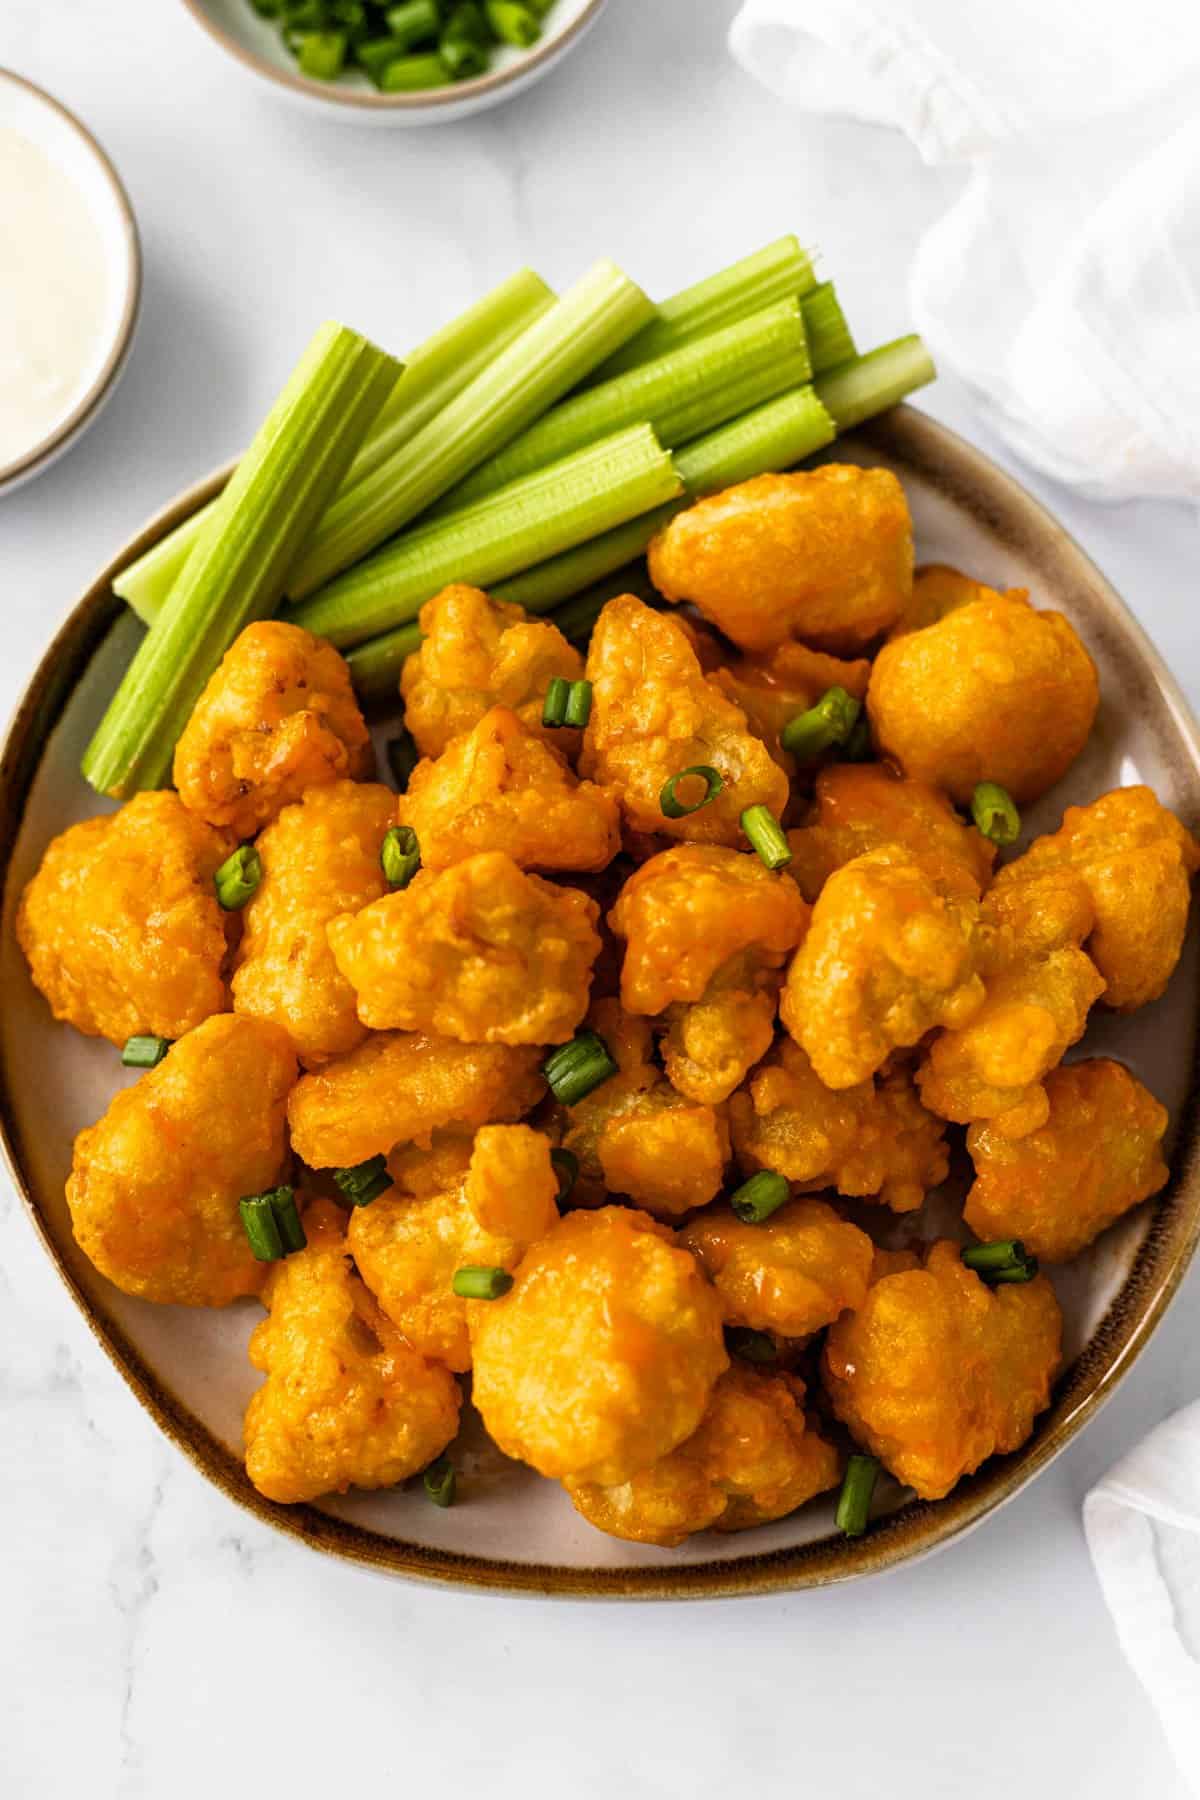 Plate of vegan buffalo cauliflower wings garnished with celery and green onions